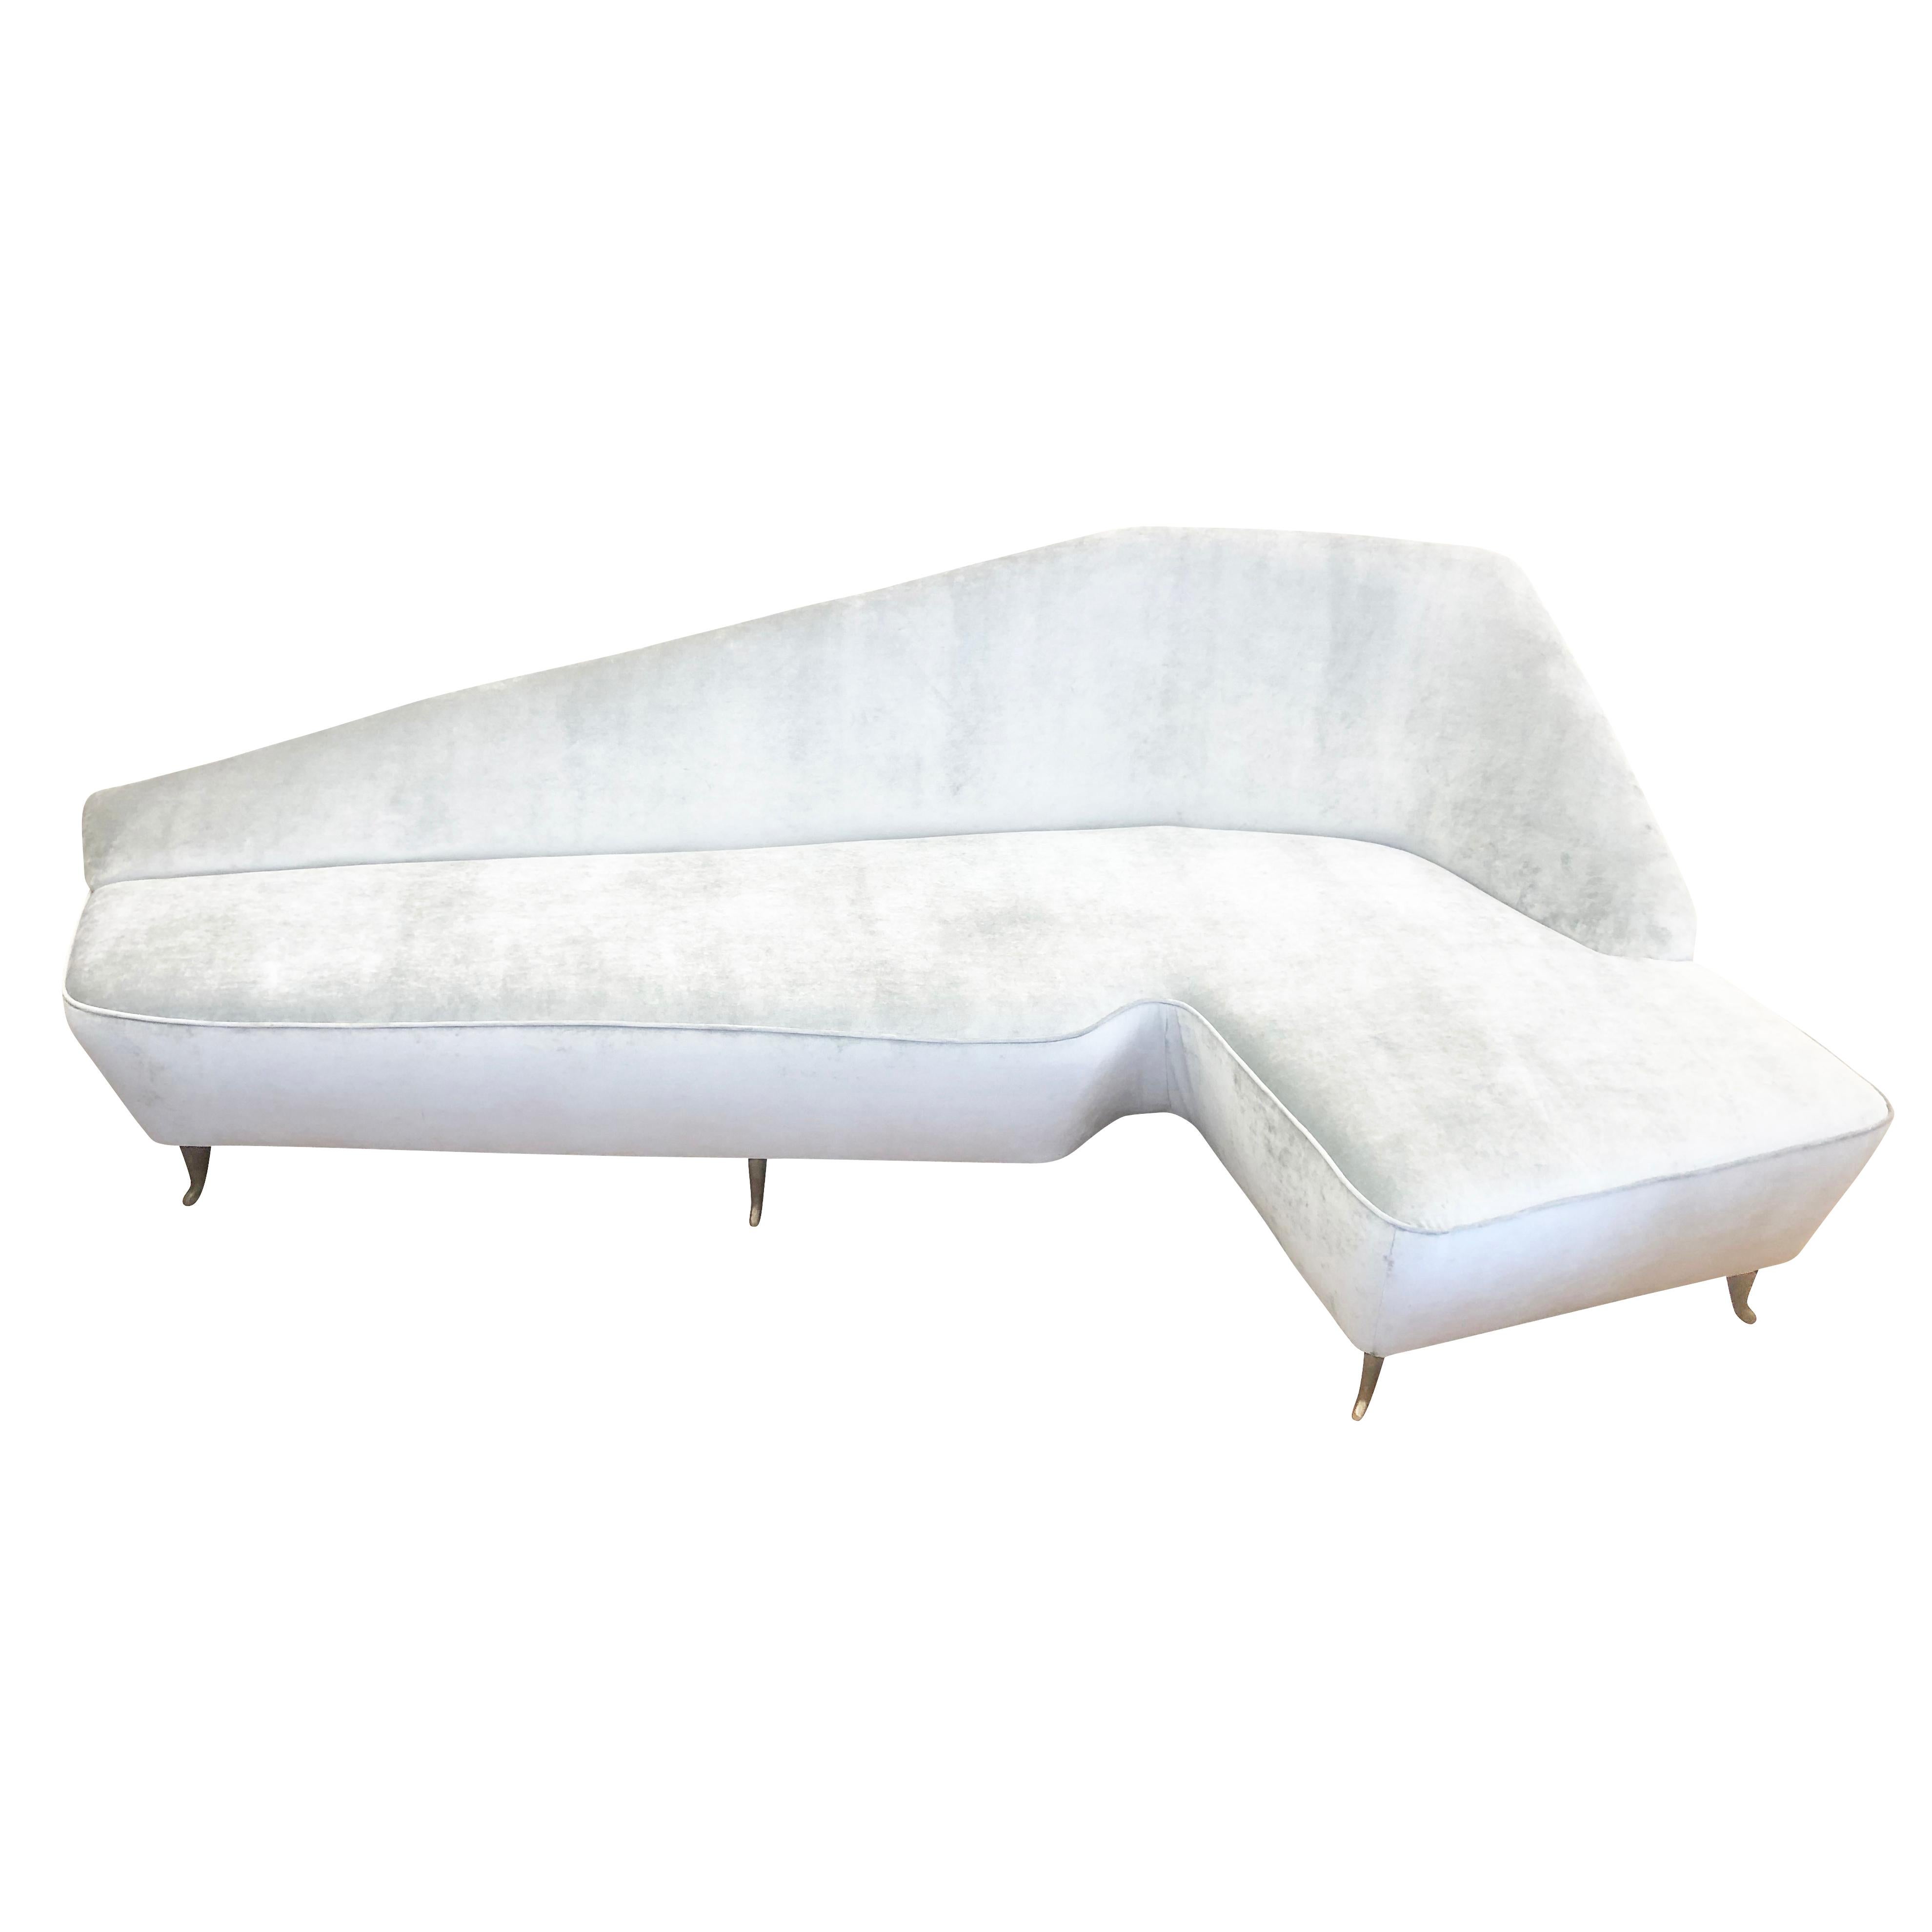 Outstanding L-shaped Italian sofa from the 1960s with a sloping back and bronze finished feet. Upholstered in a light gray velvet.

Condition: Recently re-upholstered 

Size: Width 92”

Depth 48”

Height 33”

Seat height 16”.

    